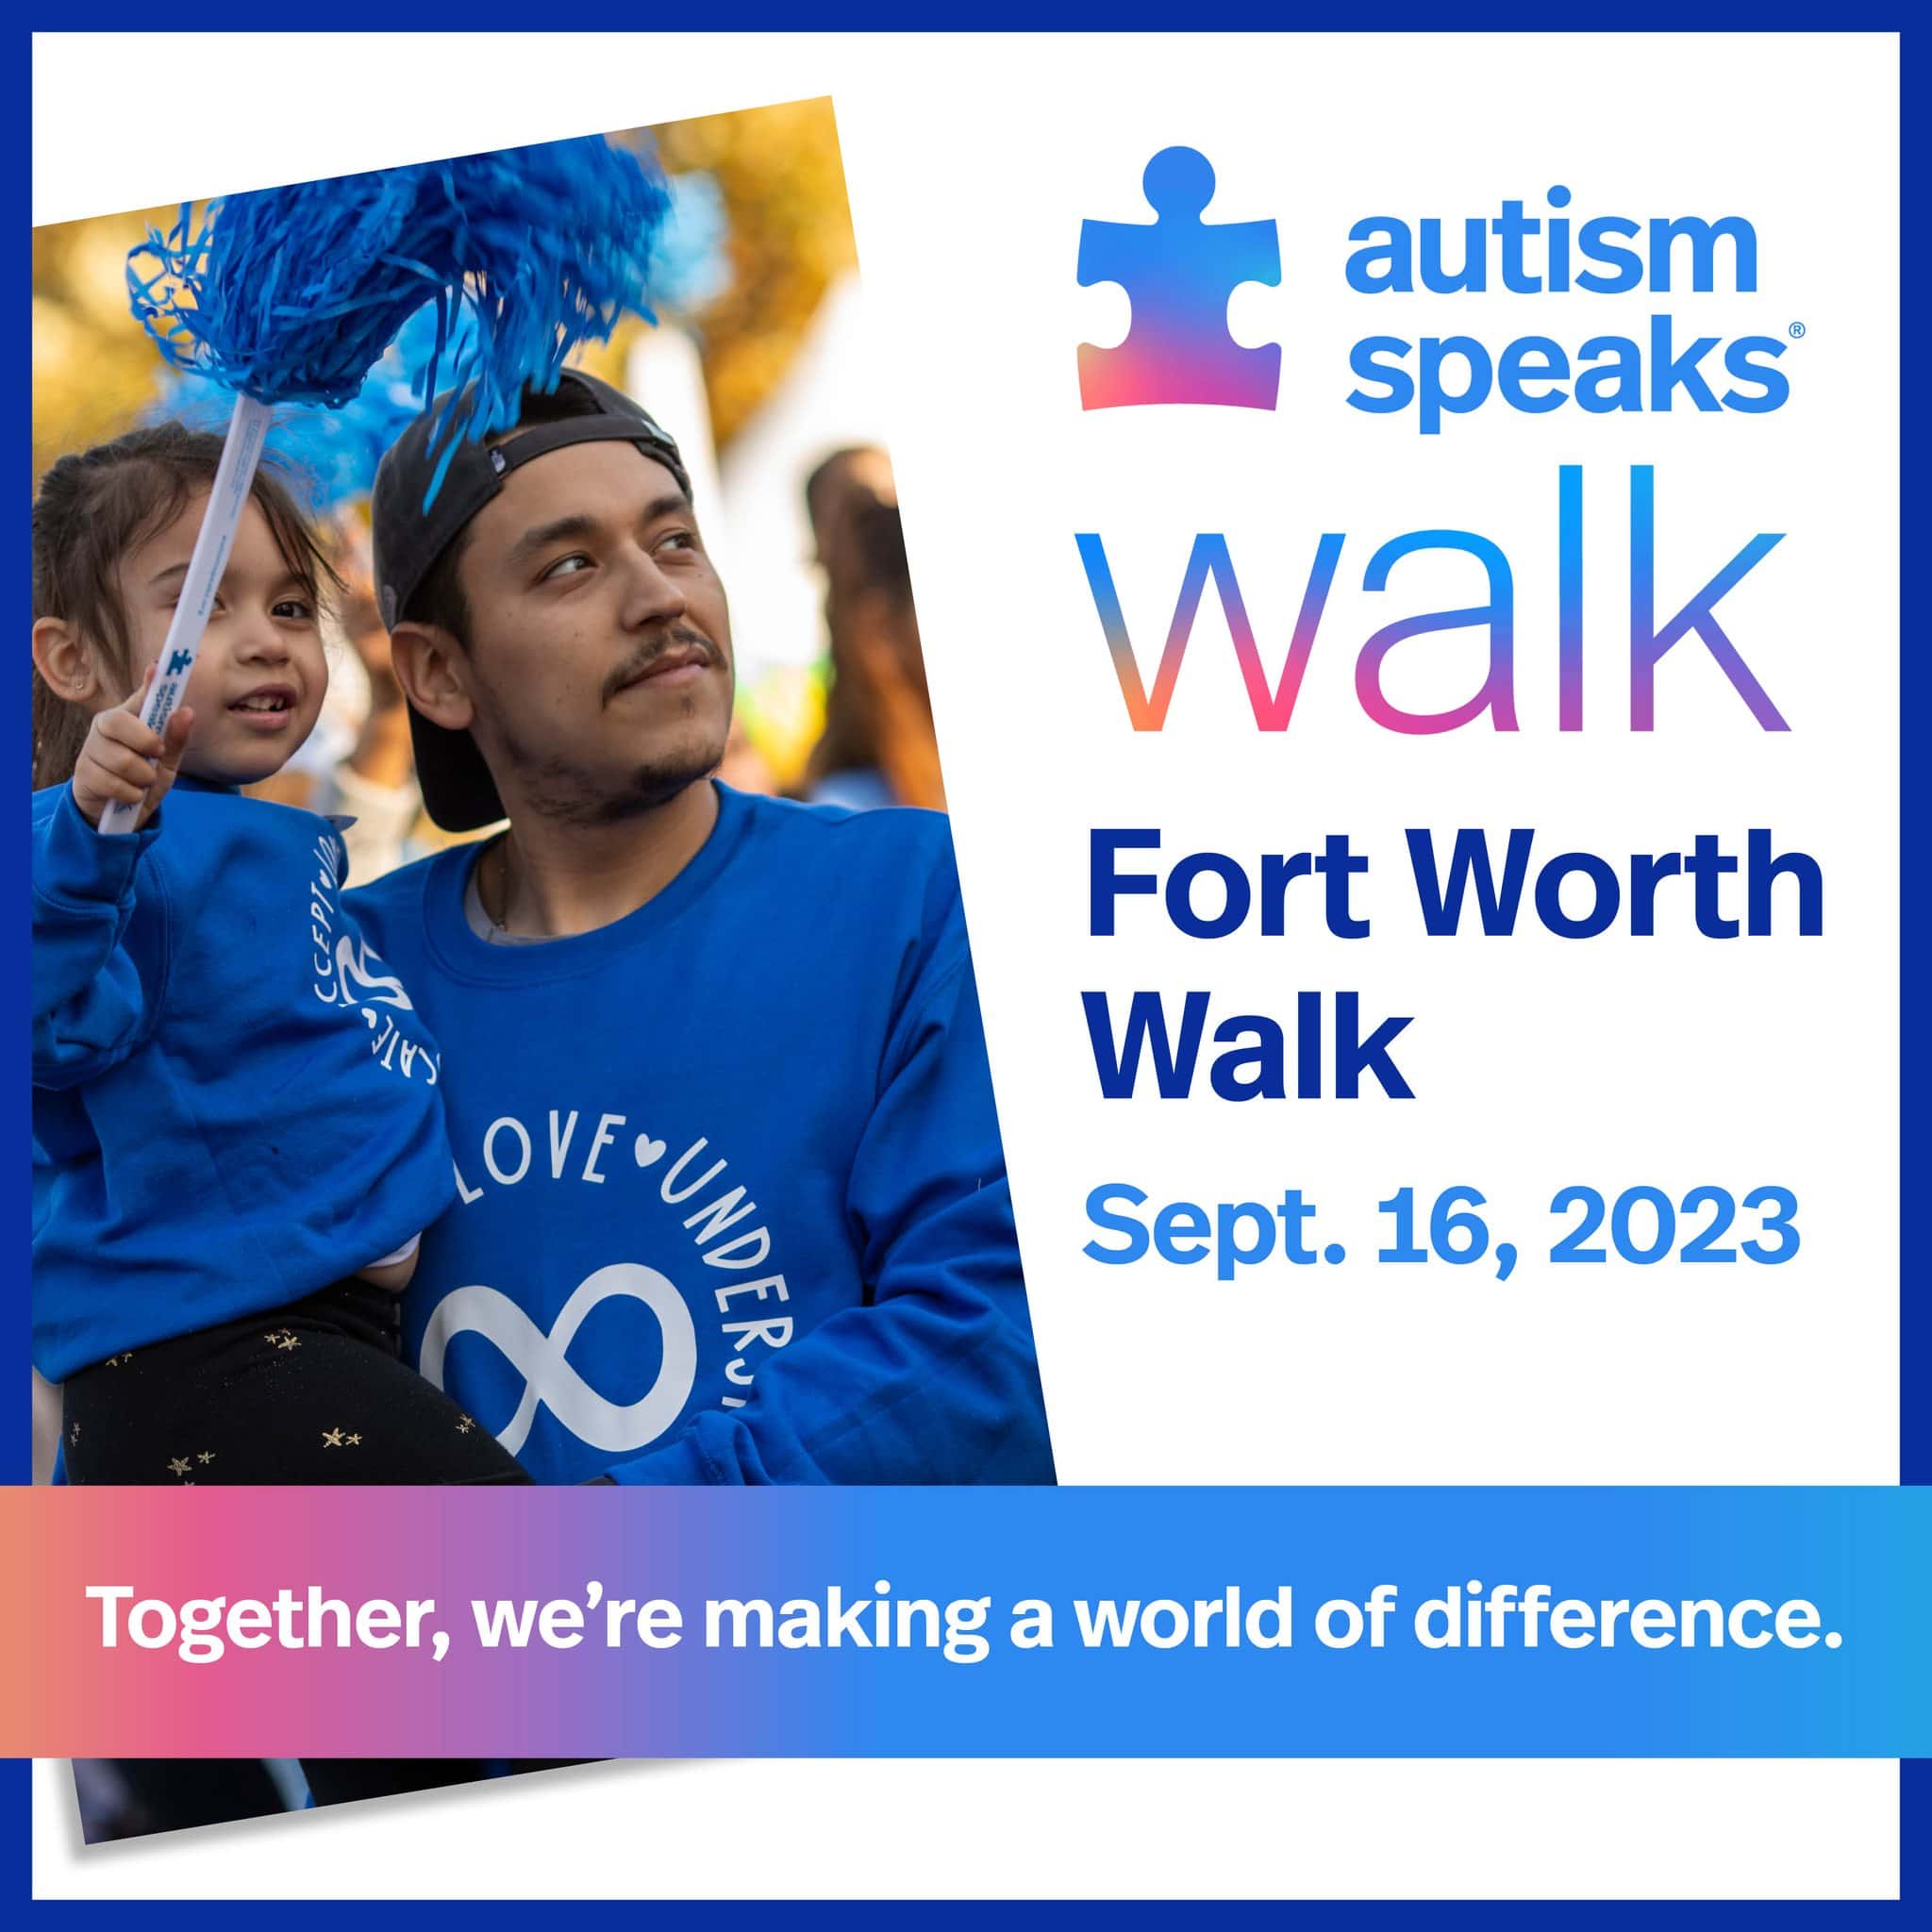 Autism Speaks invites Fort Worth residents to support those with autism